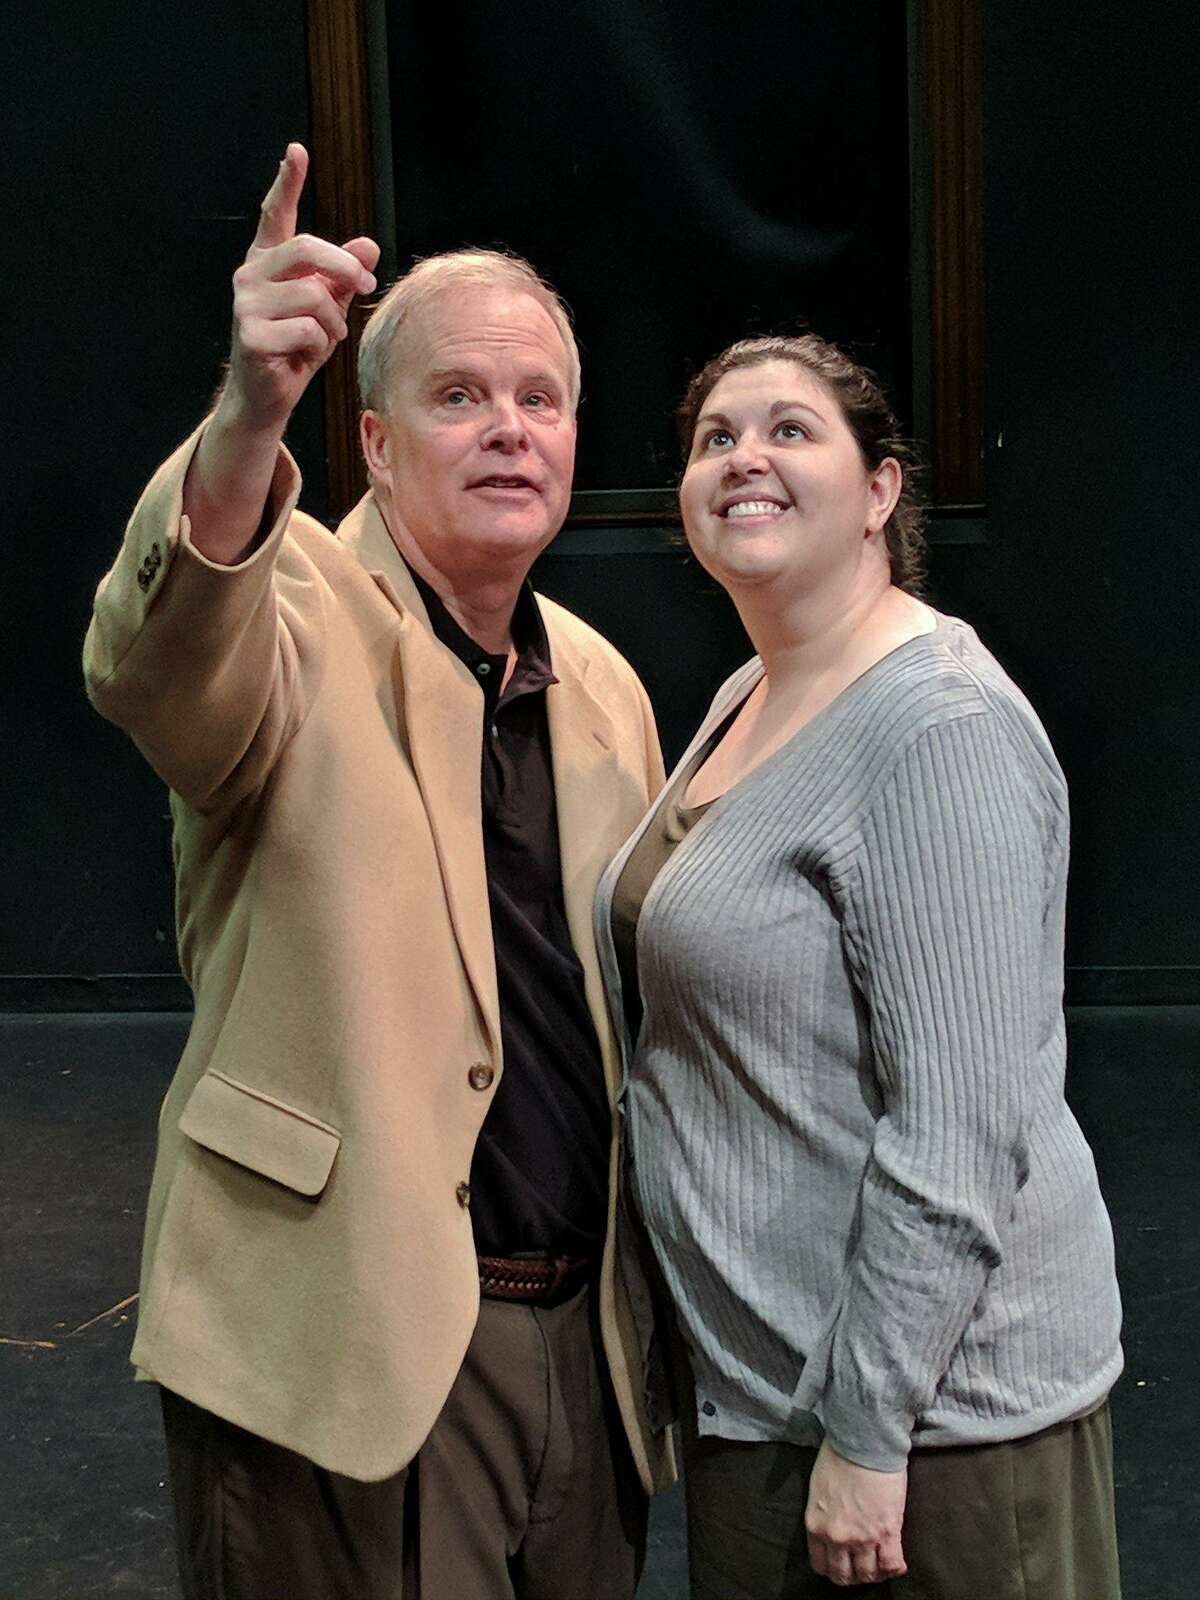 Phoenix Theater Company presents “Cabaret” at Oddfellows Playhouse in Middletown, opening March 23. Above, Ed Hobson and Katherine Loy rehearse a scene.